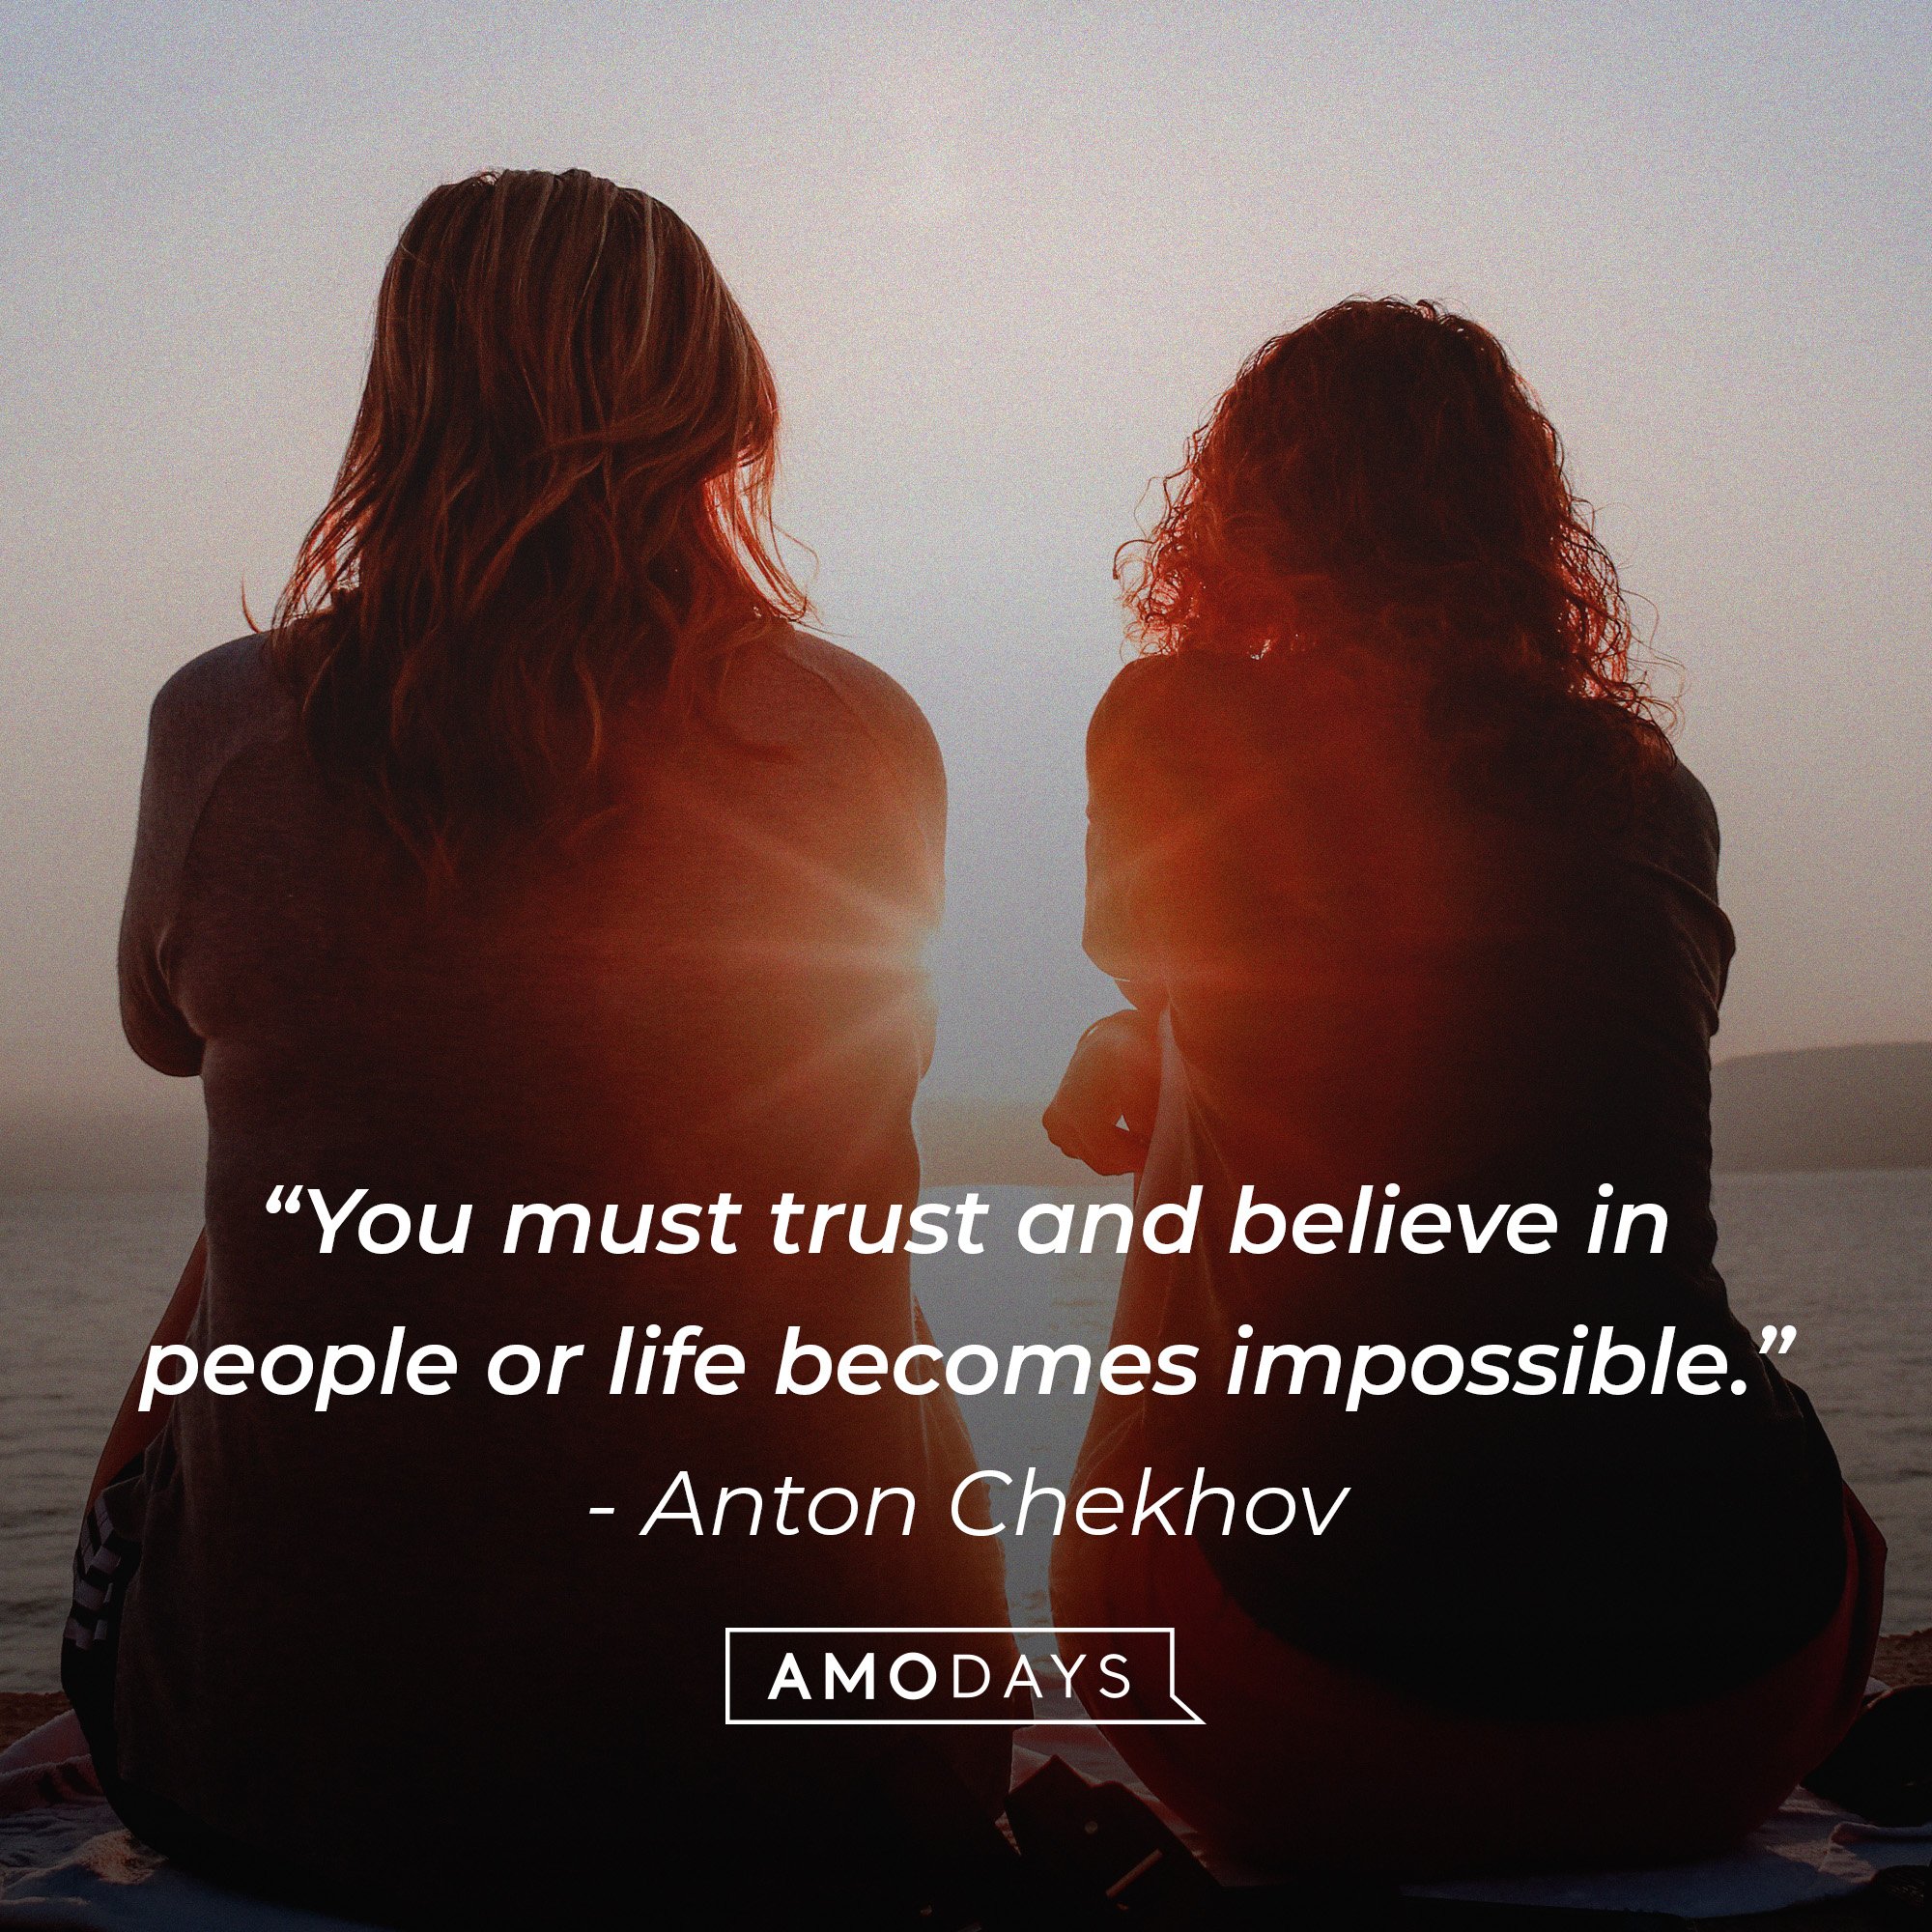 Anton Chekhov’s quote: “You must trust and believe in people or life becomes impossible.” | Image: AmoDays